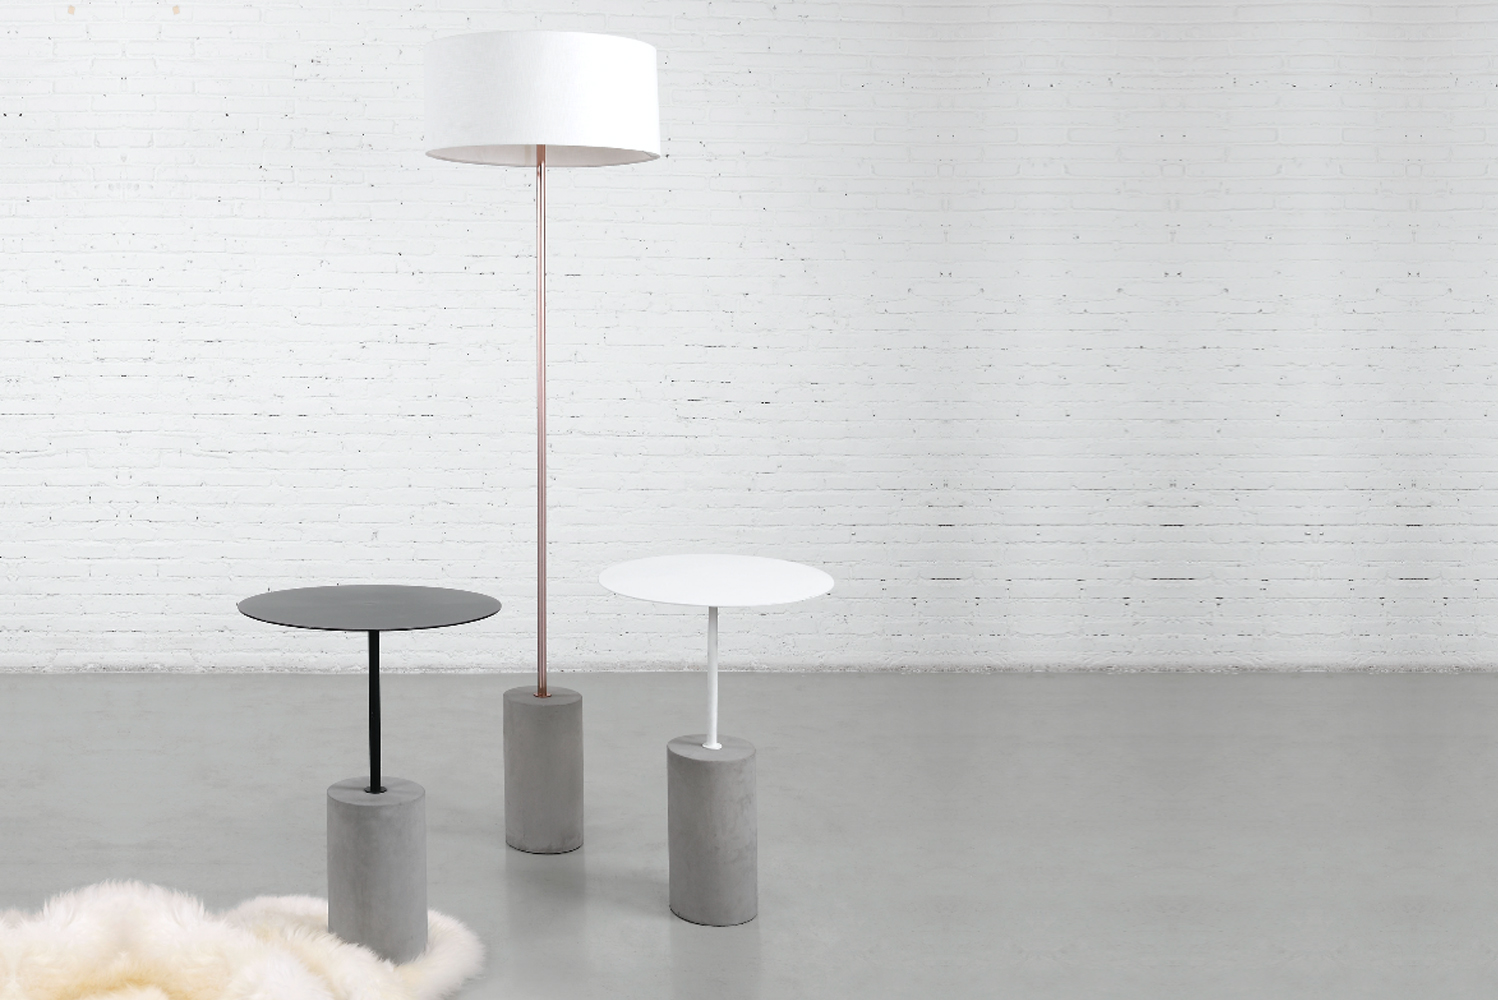 mad furniture design launched the Pier occasional table